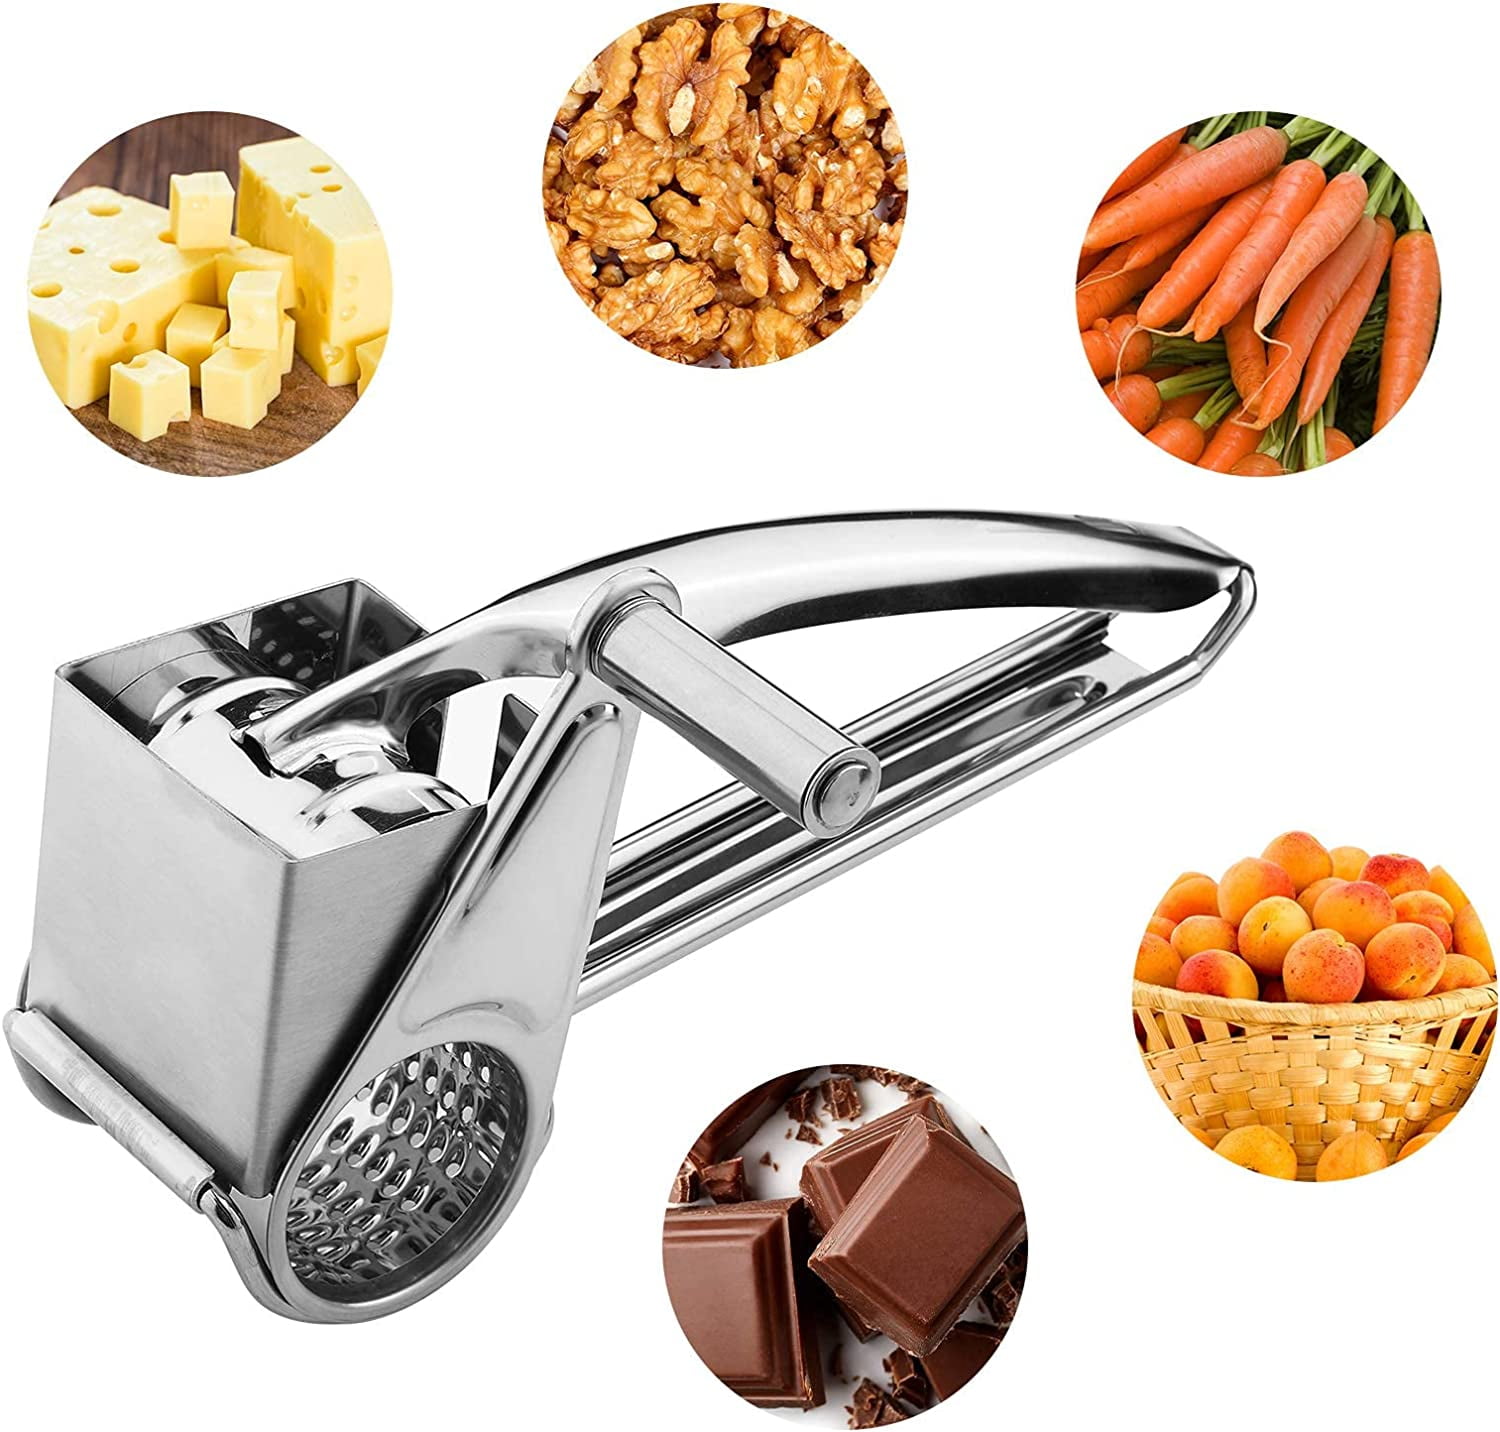 Casewin Rotary Cheese Grater Stainless Steel Block Cheese Shredder Slicer  Vegetable Cutter Hand Held Rotary Shredder Cutter Slicer 